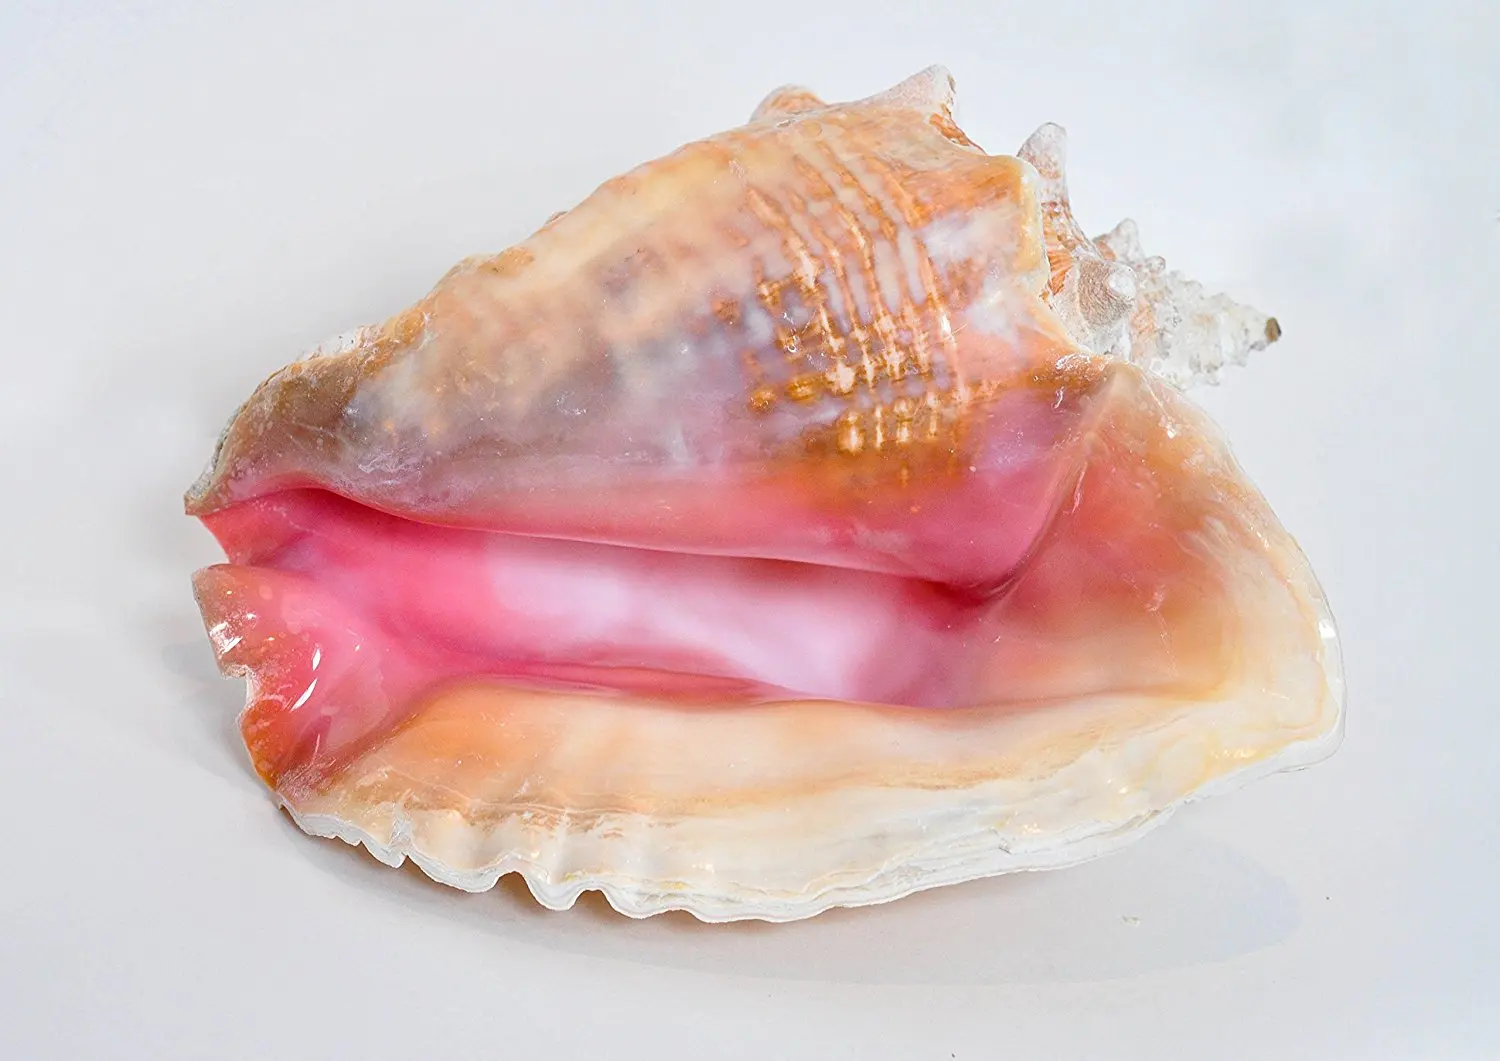 Buy Pink Bahama Queen Conch Shell - 6-8 Inch Conch Shell All-Natural